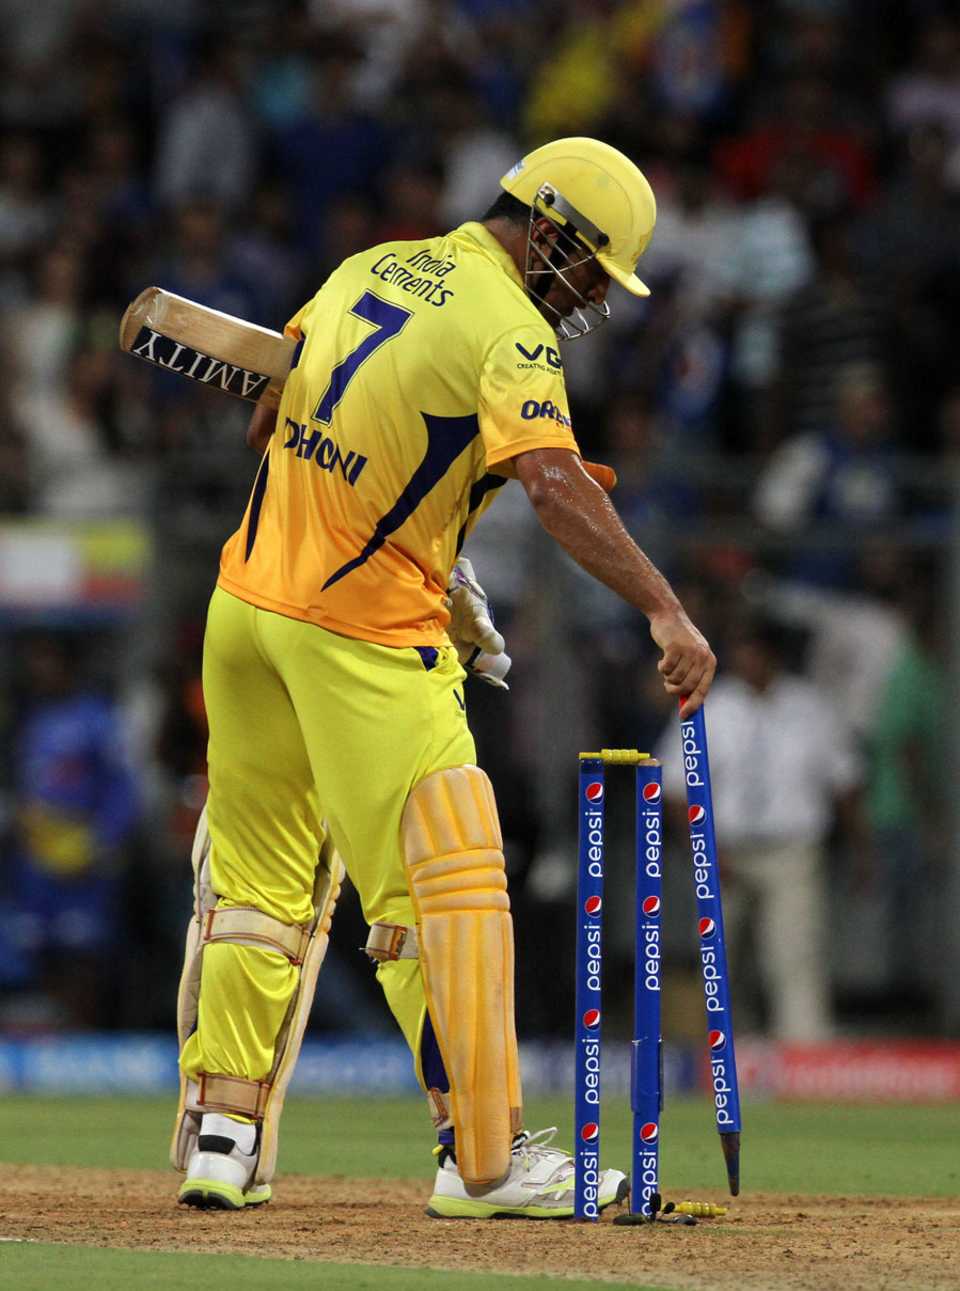 MS Dhoni collects a stump after hitting the winning runs